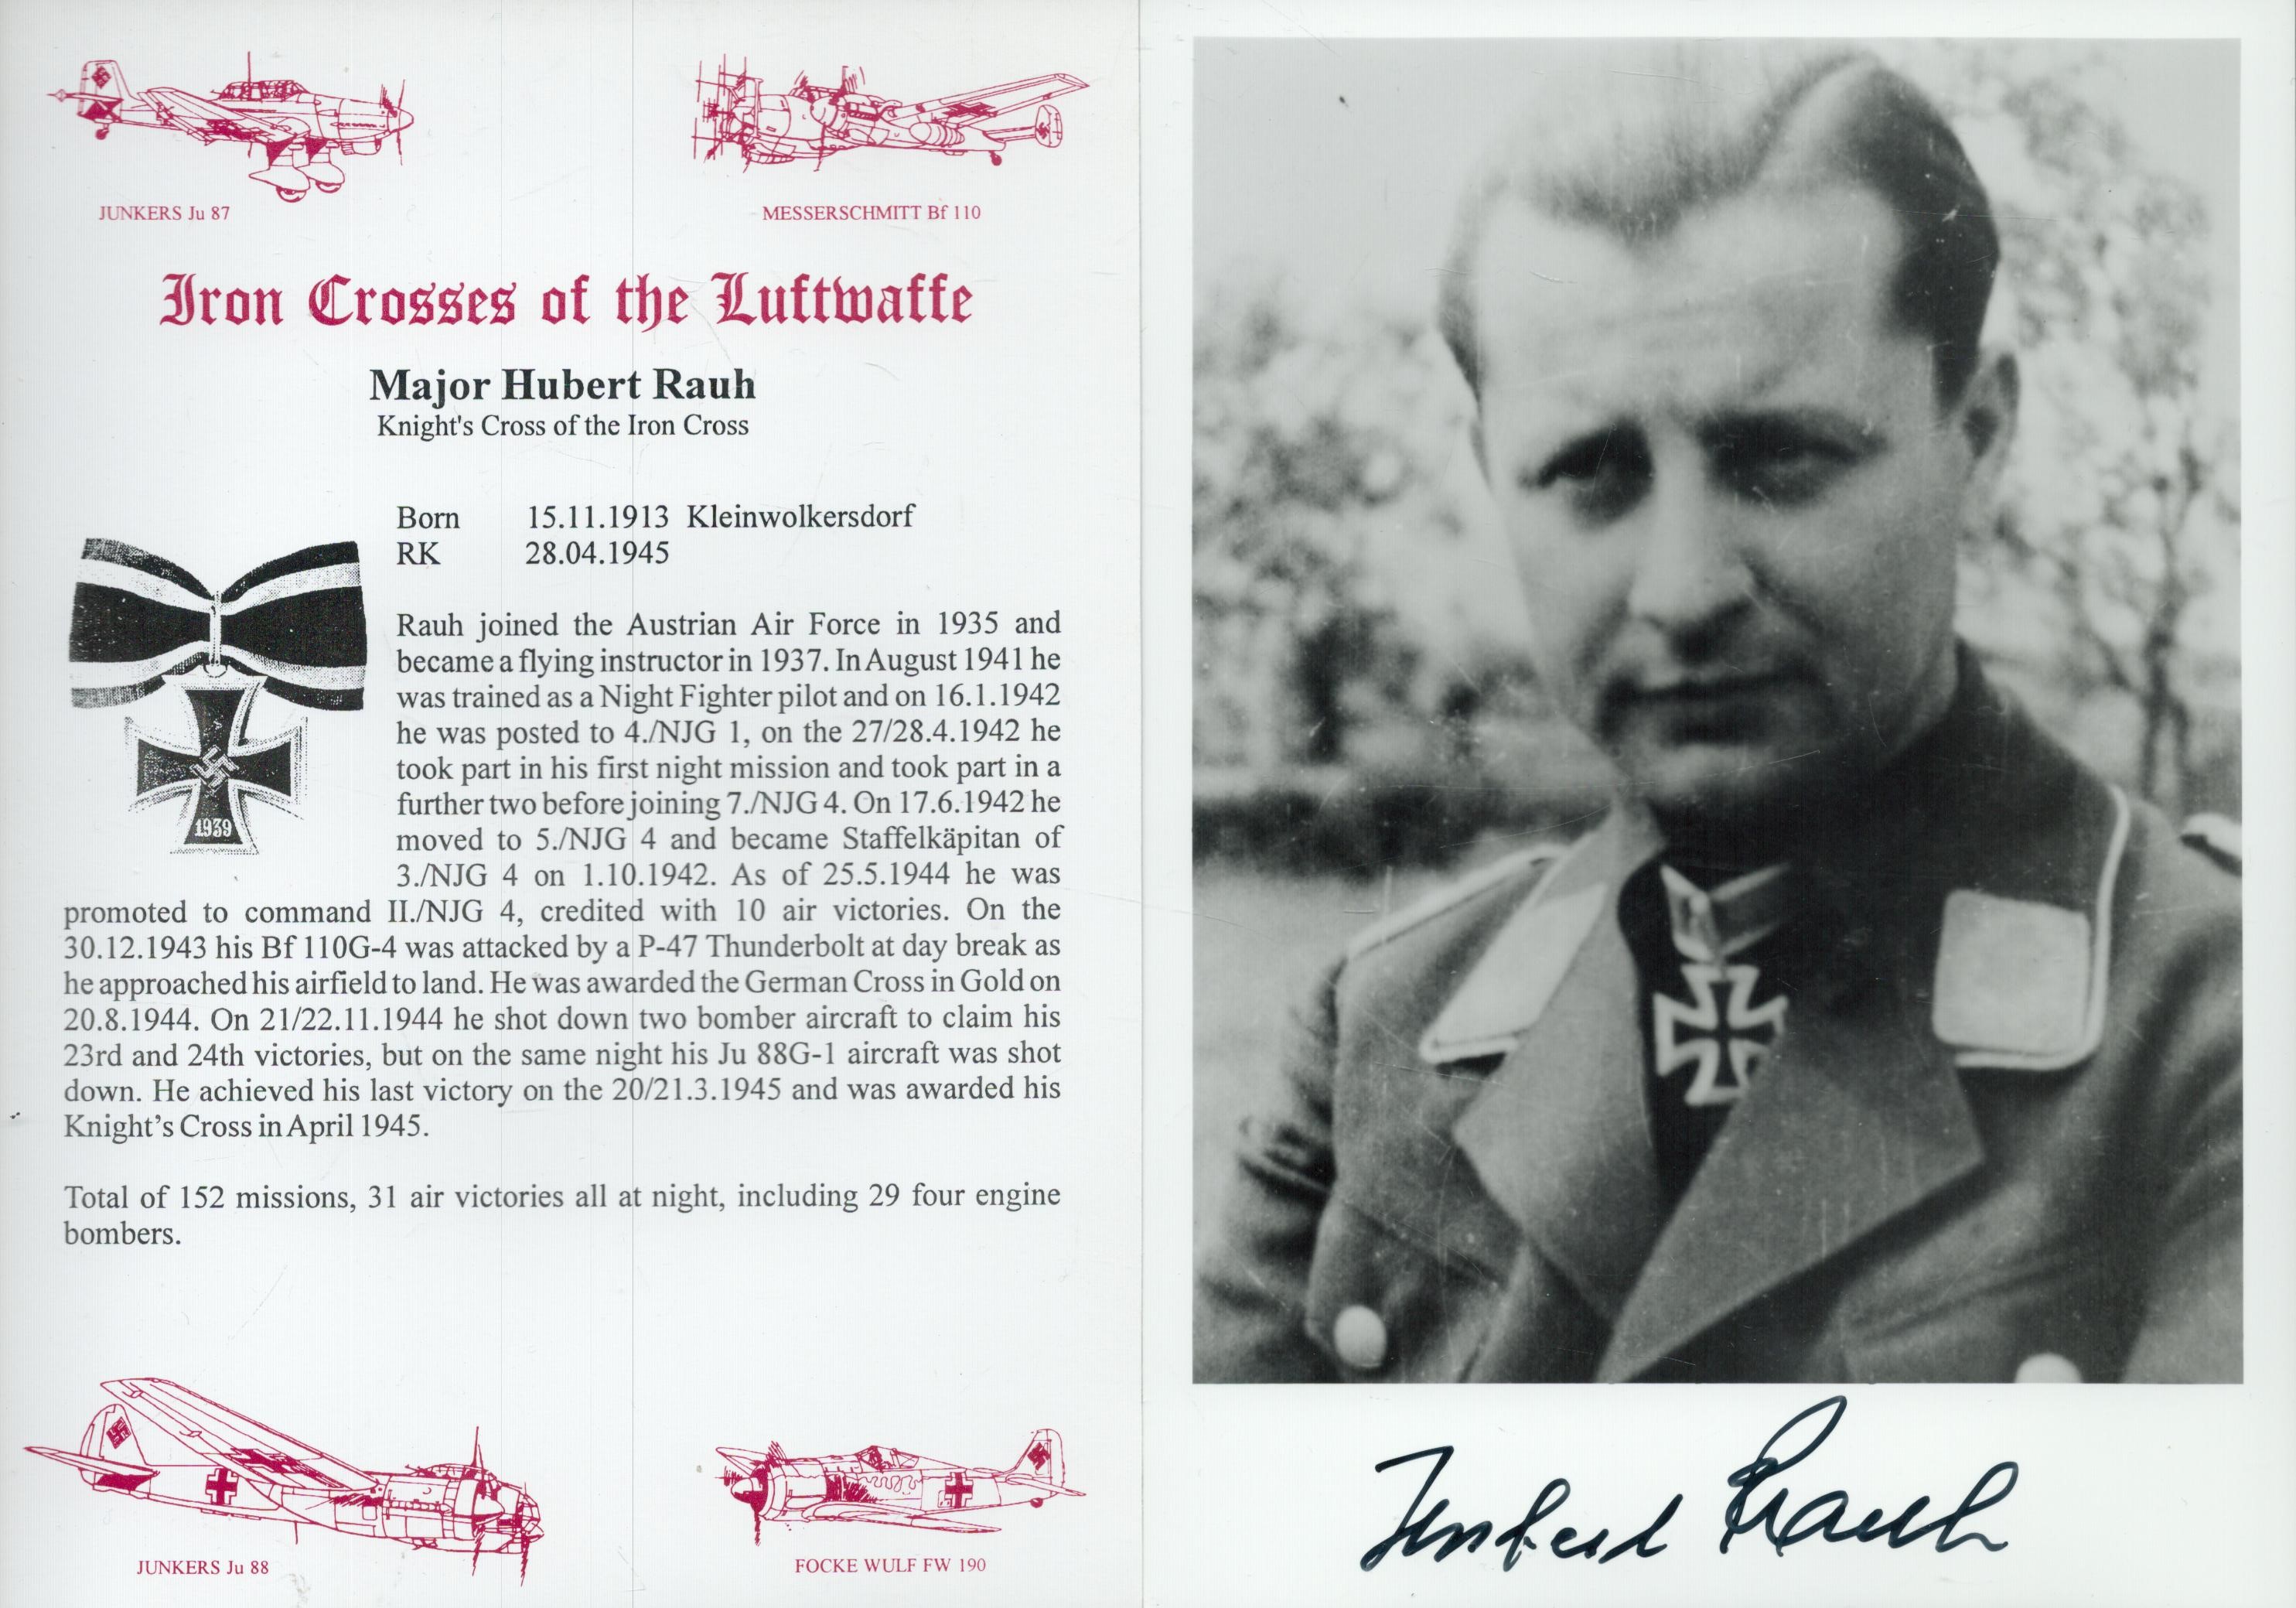 WW2 Luftwaffe fighter ace Mjr Hubert Rauh KC signed 7 x 5 inch b/w portrait photo along with a super